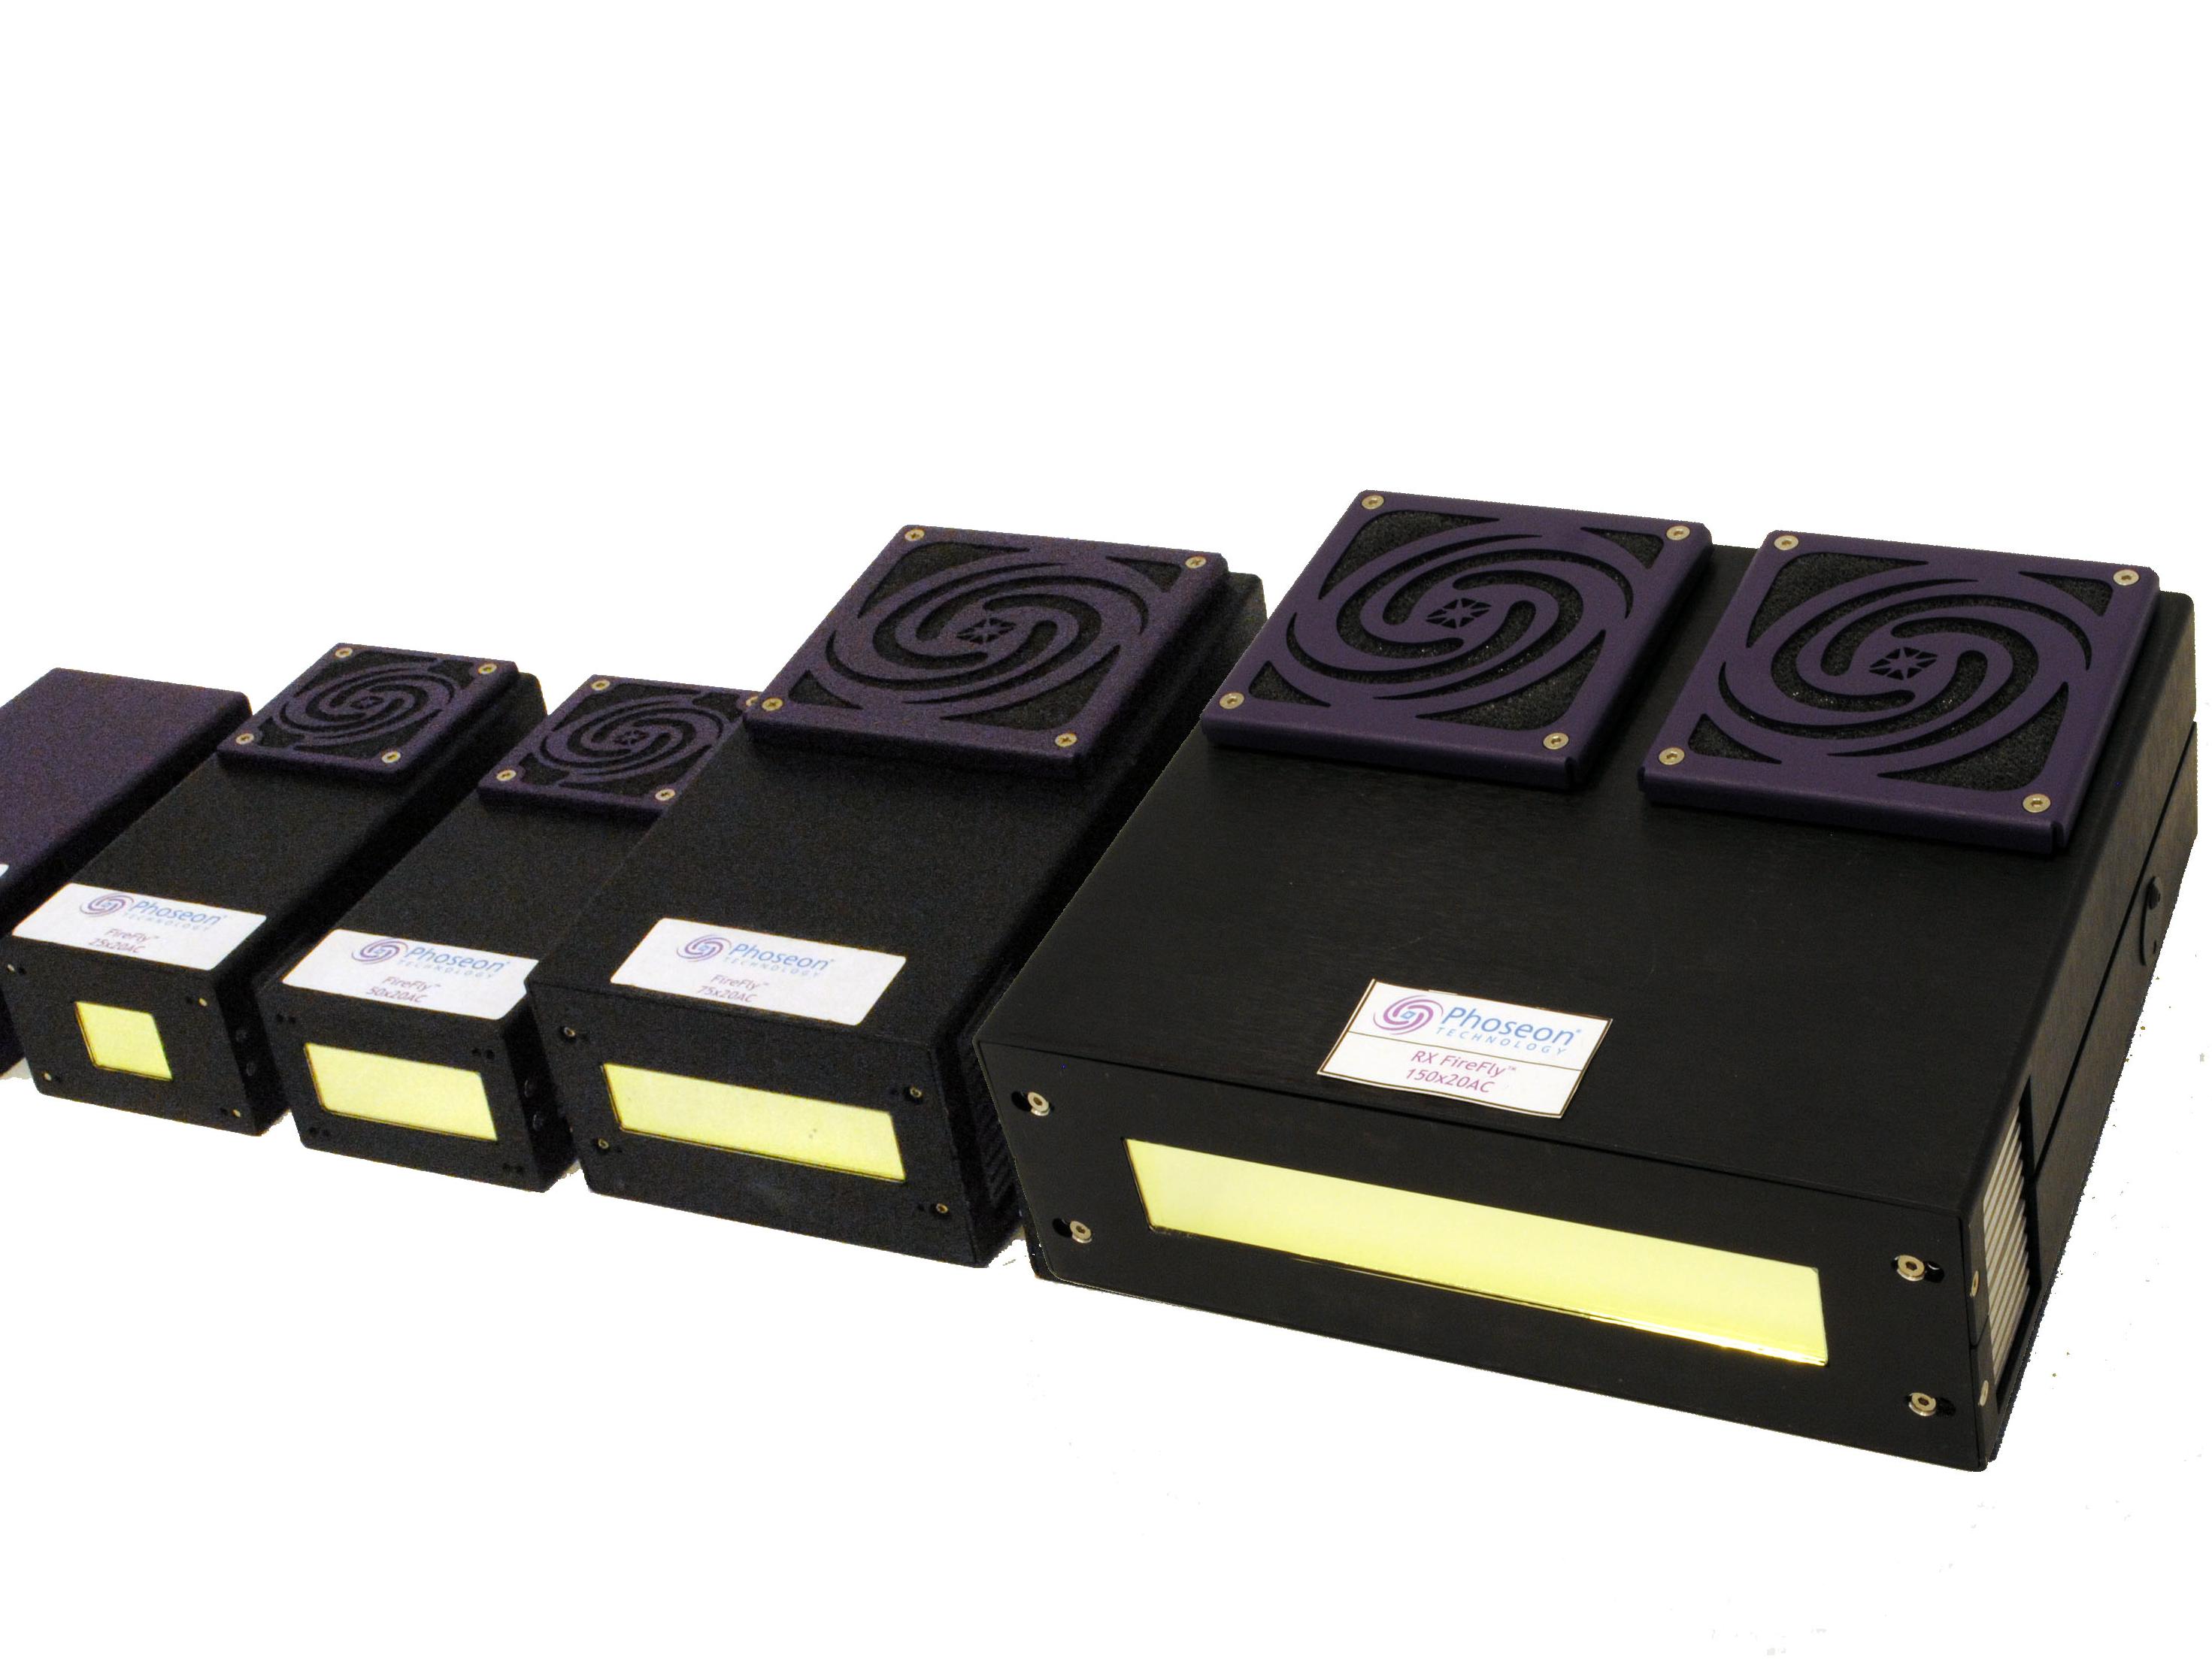 Phoseon Firefly high-performance UV LED System from Intertronics